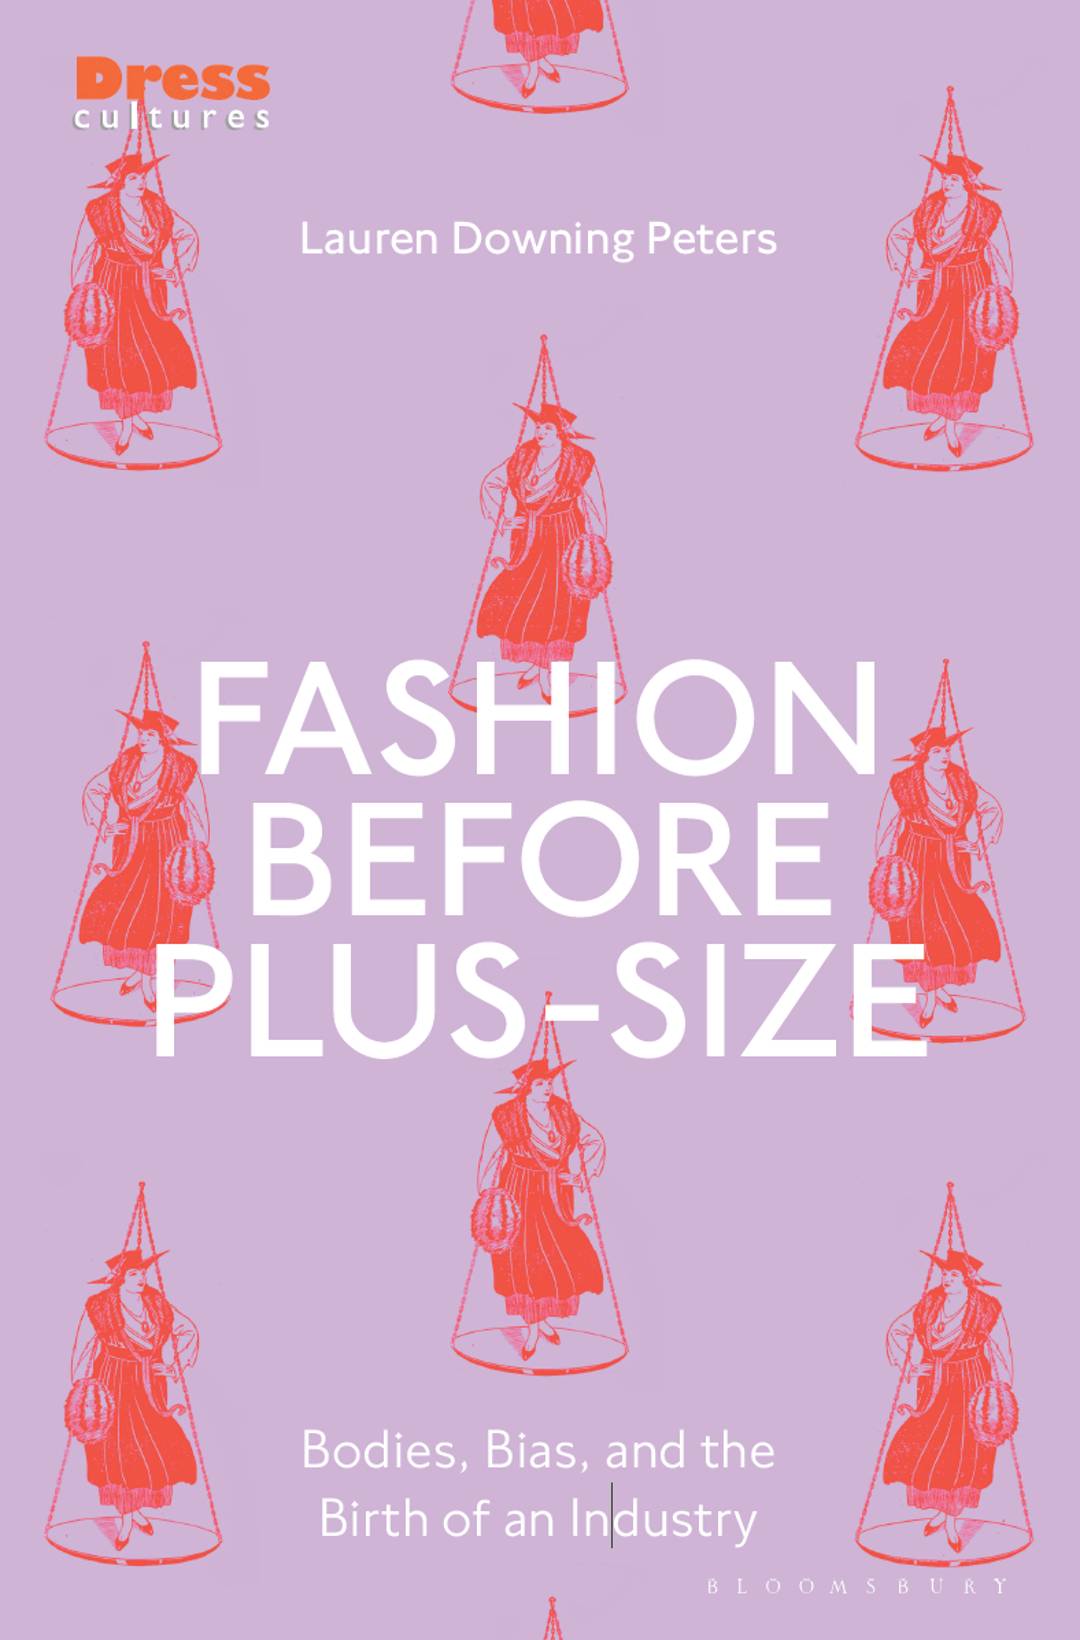 Fashion Before Plus-Size; Bodies, Bias, and the Birth of an Industry
by Bloomsbury Visual Arts, 2023